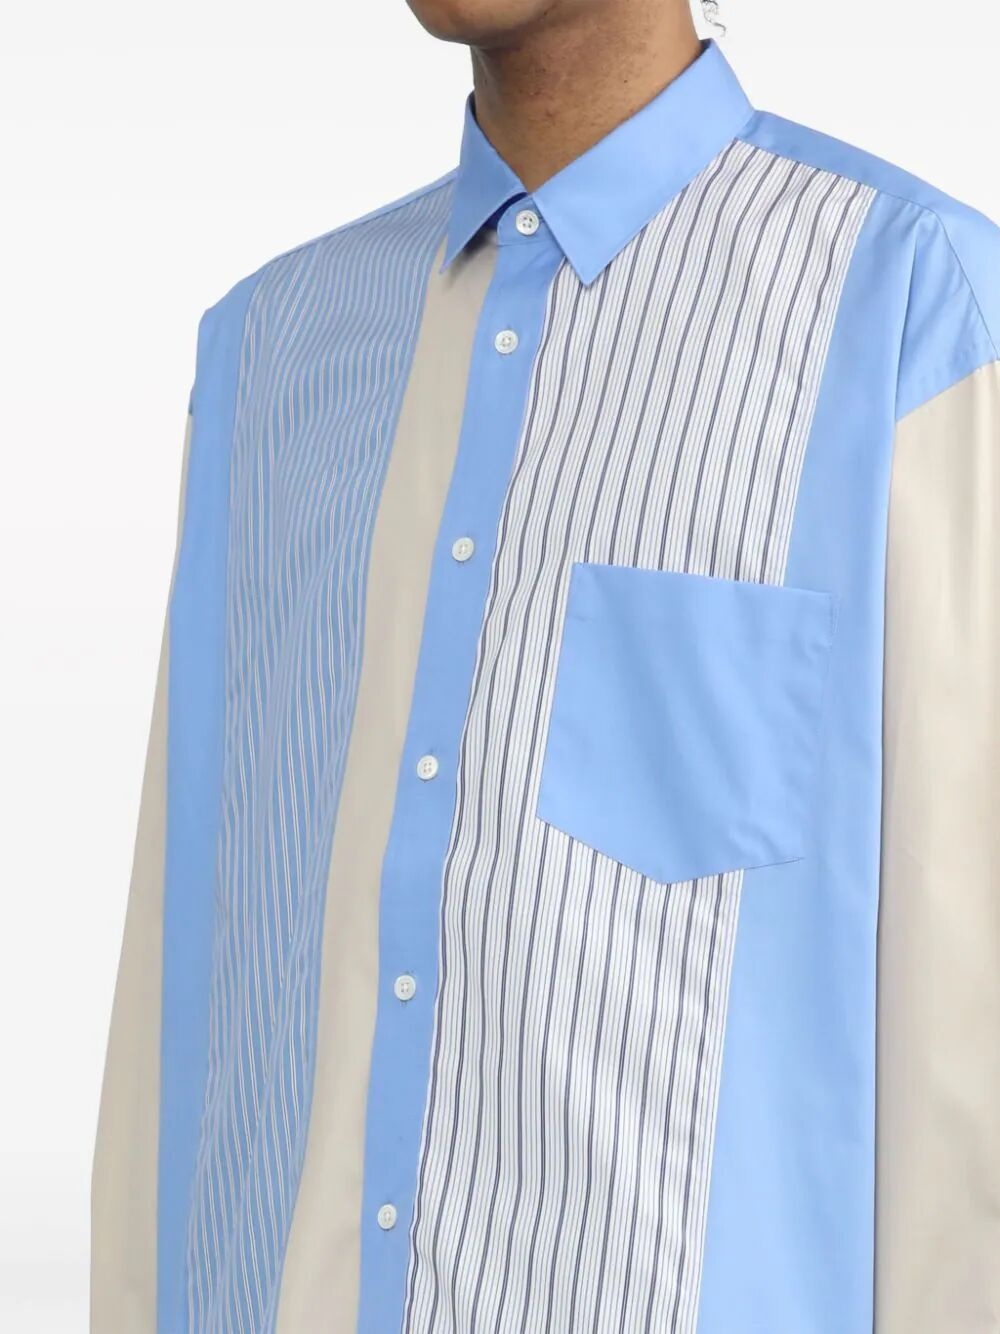 STRIPED SHIRT WITH PATCH - 6